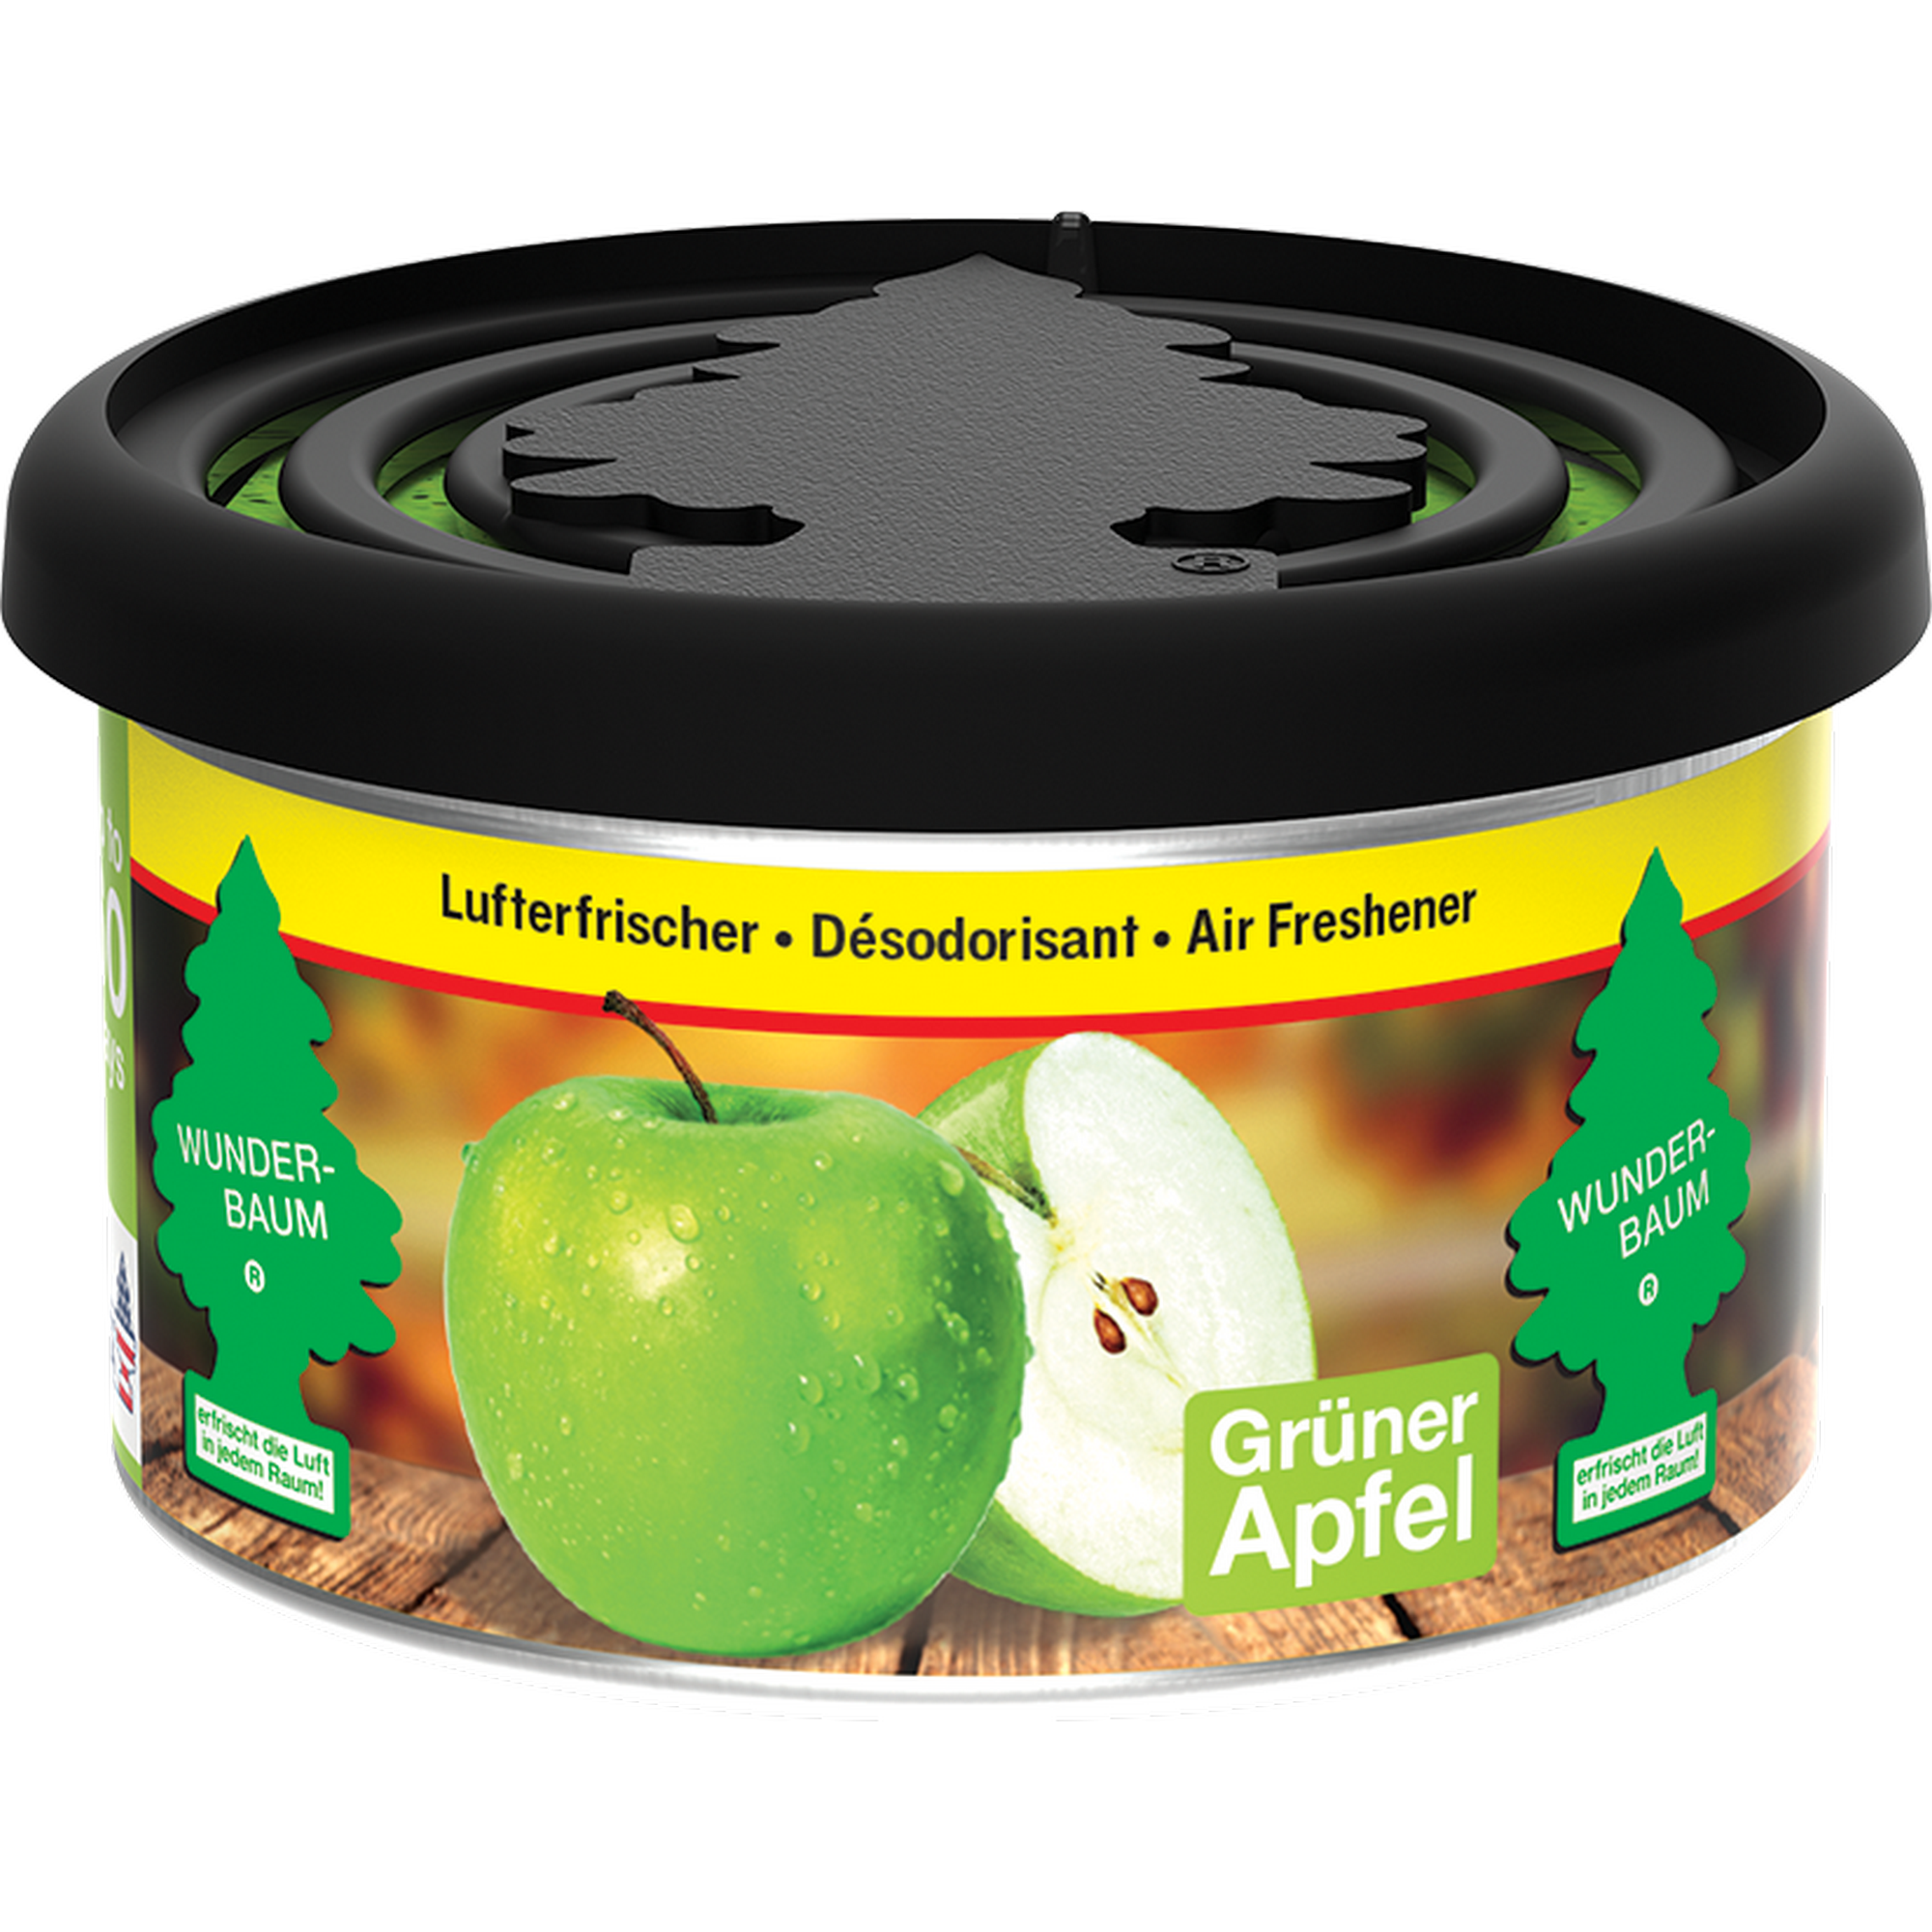 Lufterfrischer-Dose 'Green Apple' + product picture